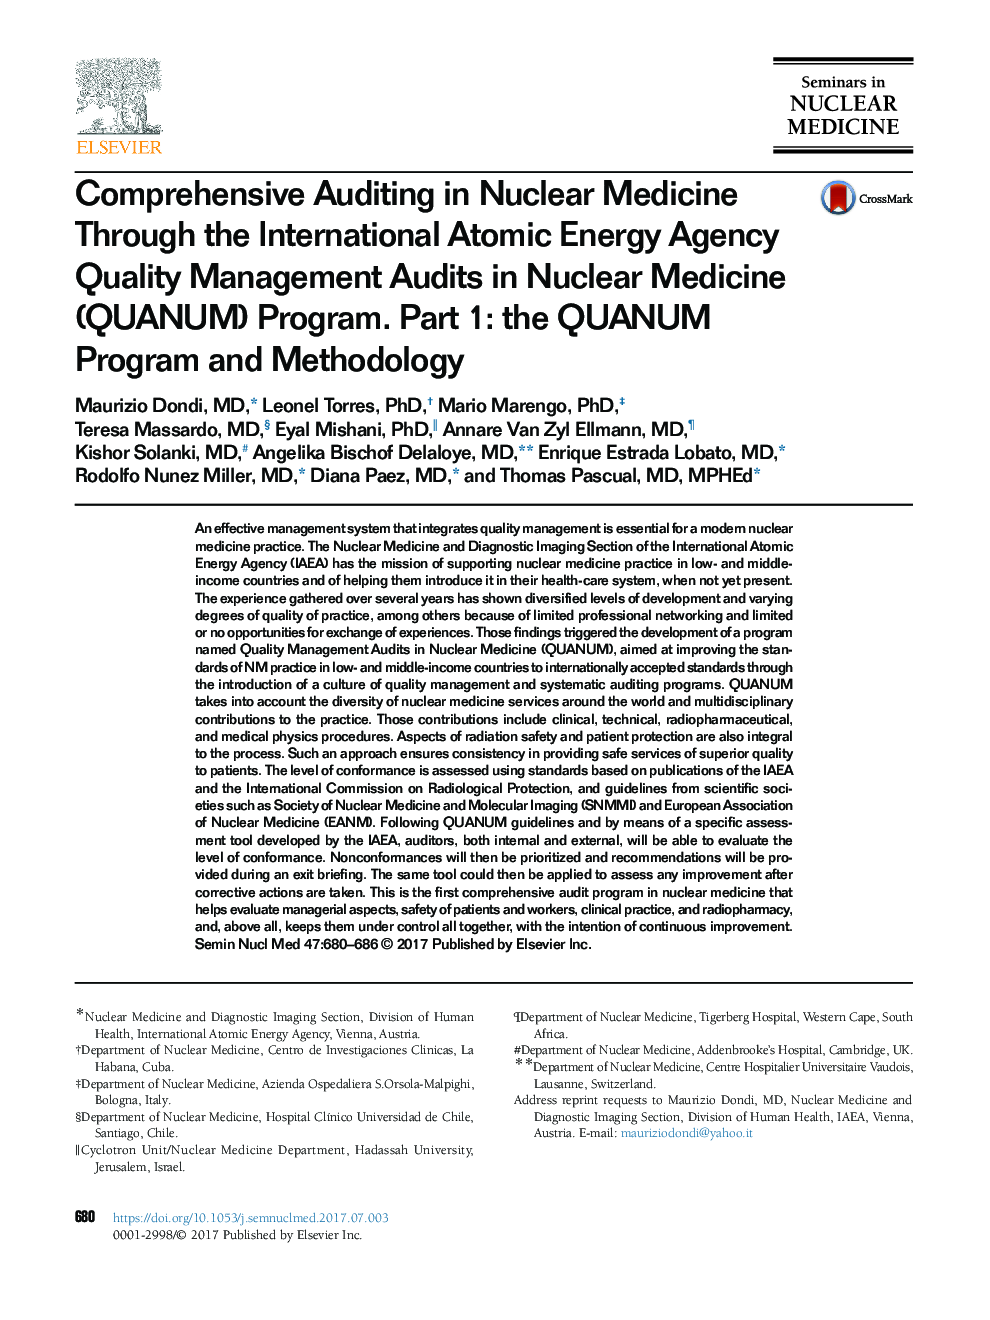 Comprehensive Auditing in Nuclear Medicine Through the International Atomic Energy Agency Quality Management Audits in Nuclear Medicine (QUANUM) Program. Part 1: the QUANUM Program and Methodology